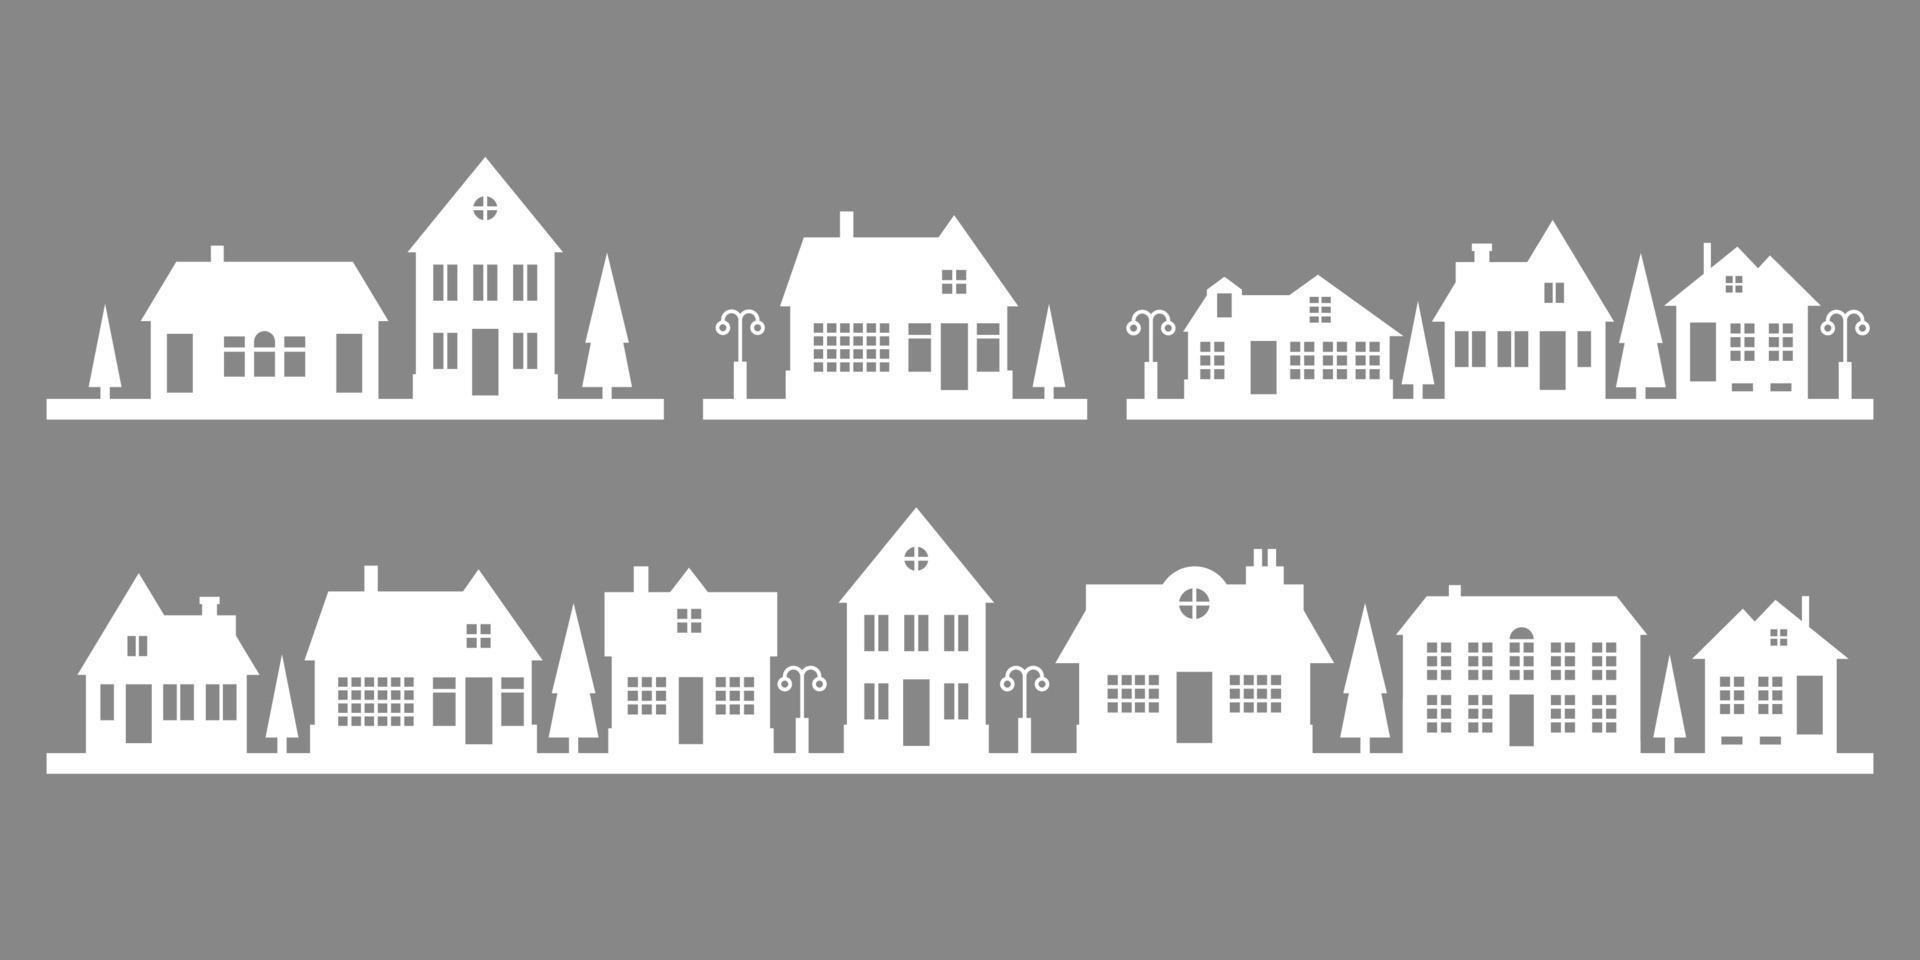 Silhouette of houses on the skyline. Suburban neighborhood landscape. Countryside cottage homes. Glyph vector illustration.